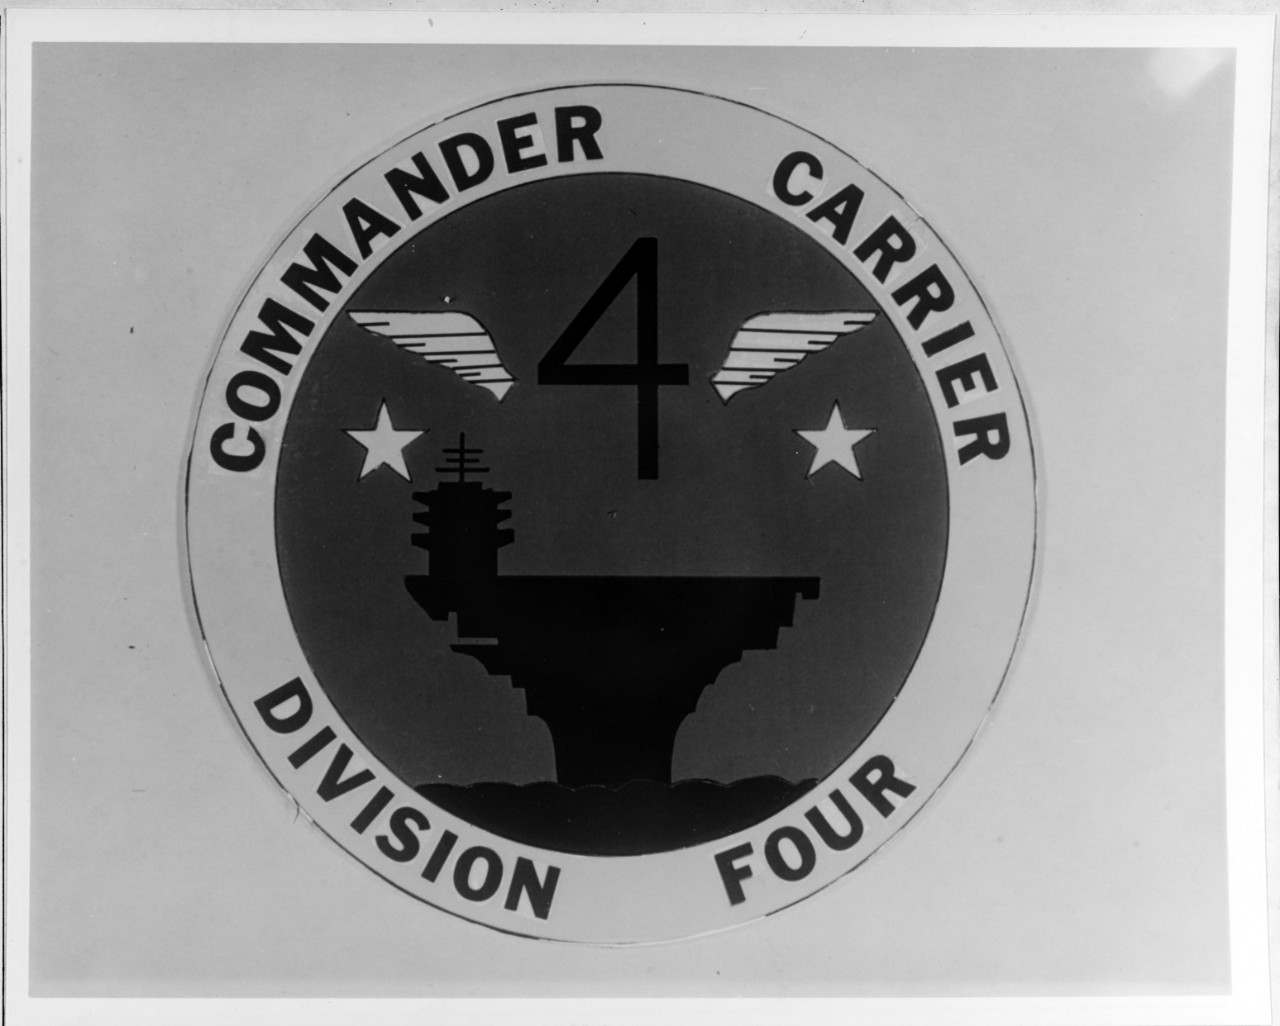 Insignia: Commander Carrier Division Four